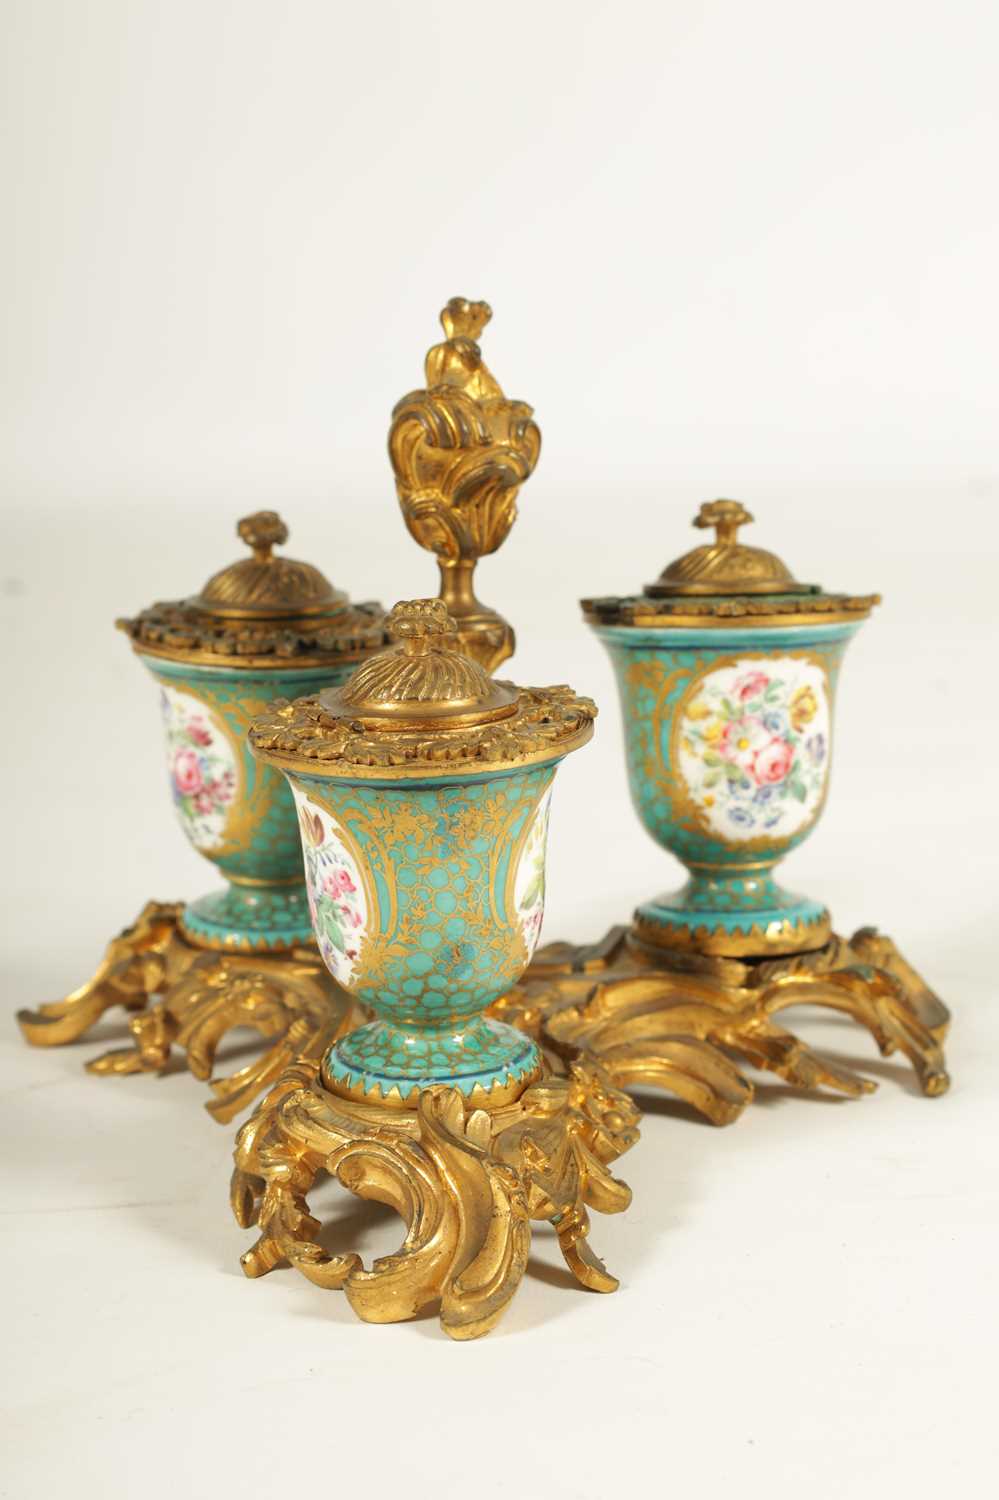 A 18TH CENTURY FRENCH ROCOCO ORMOLU AND SERVES STYLE TRIPLE INKSTAND - Image 6 of 10